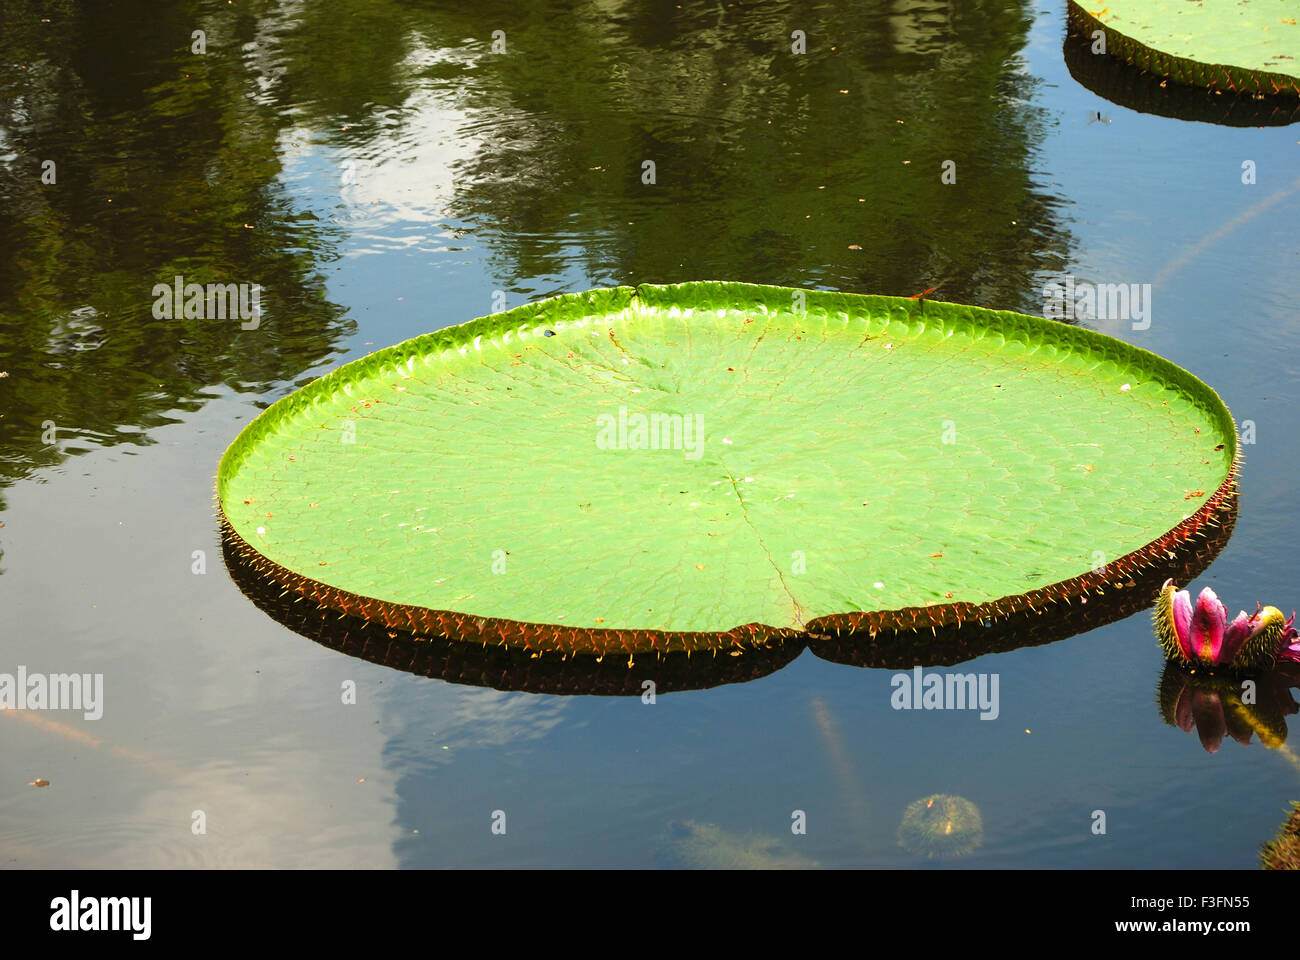 Largest lily leaf in botanical garden Stock Photo